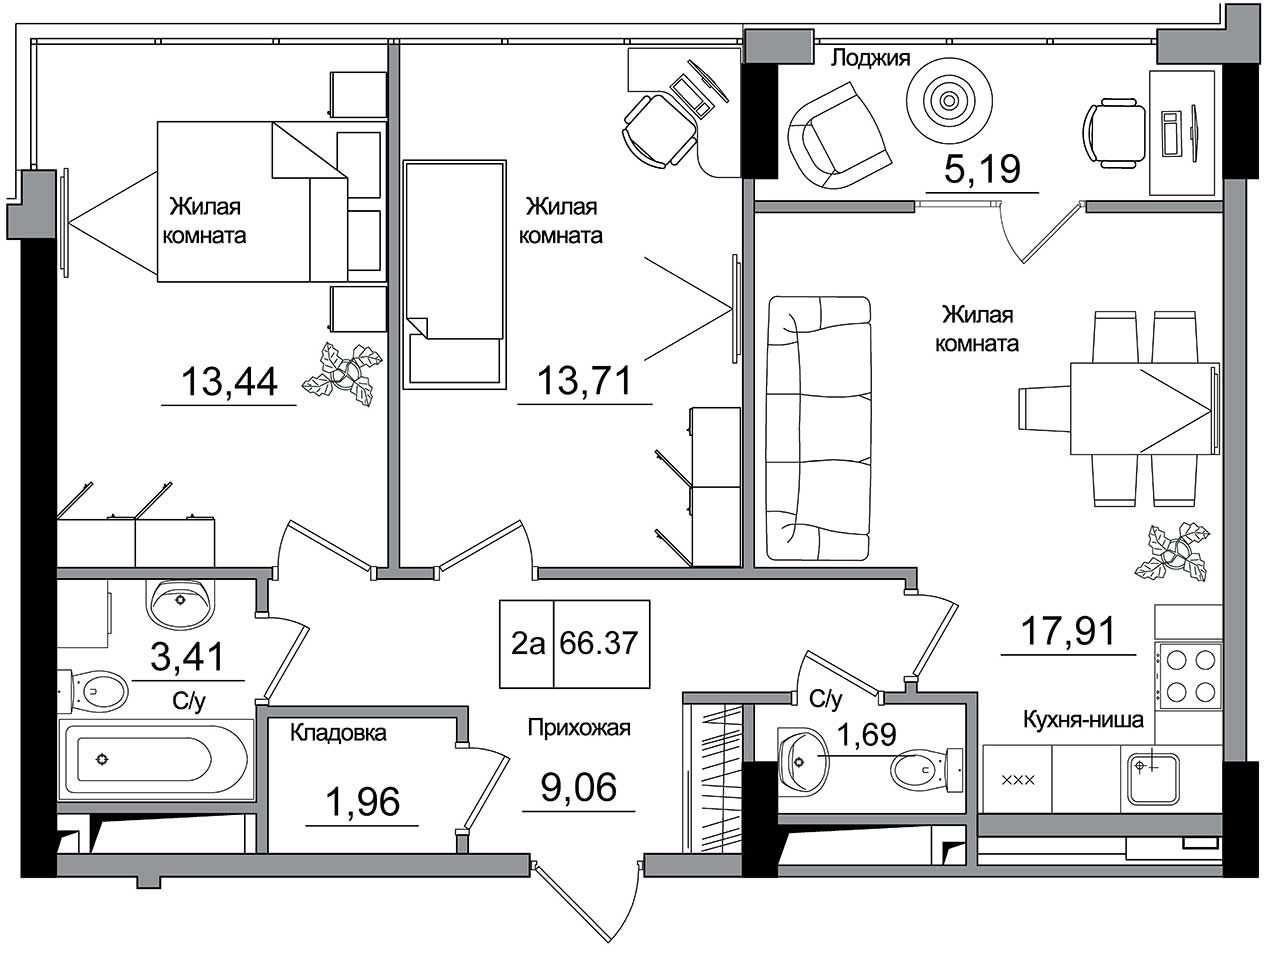 Planning 2-rm flats area 66.37m2, AB-16-08/00006.